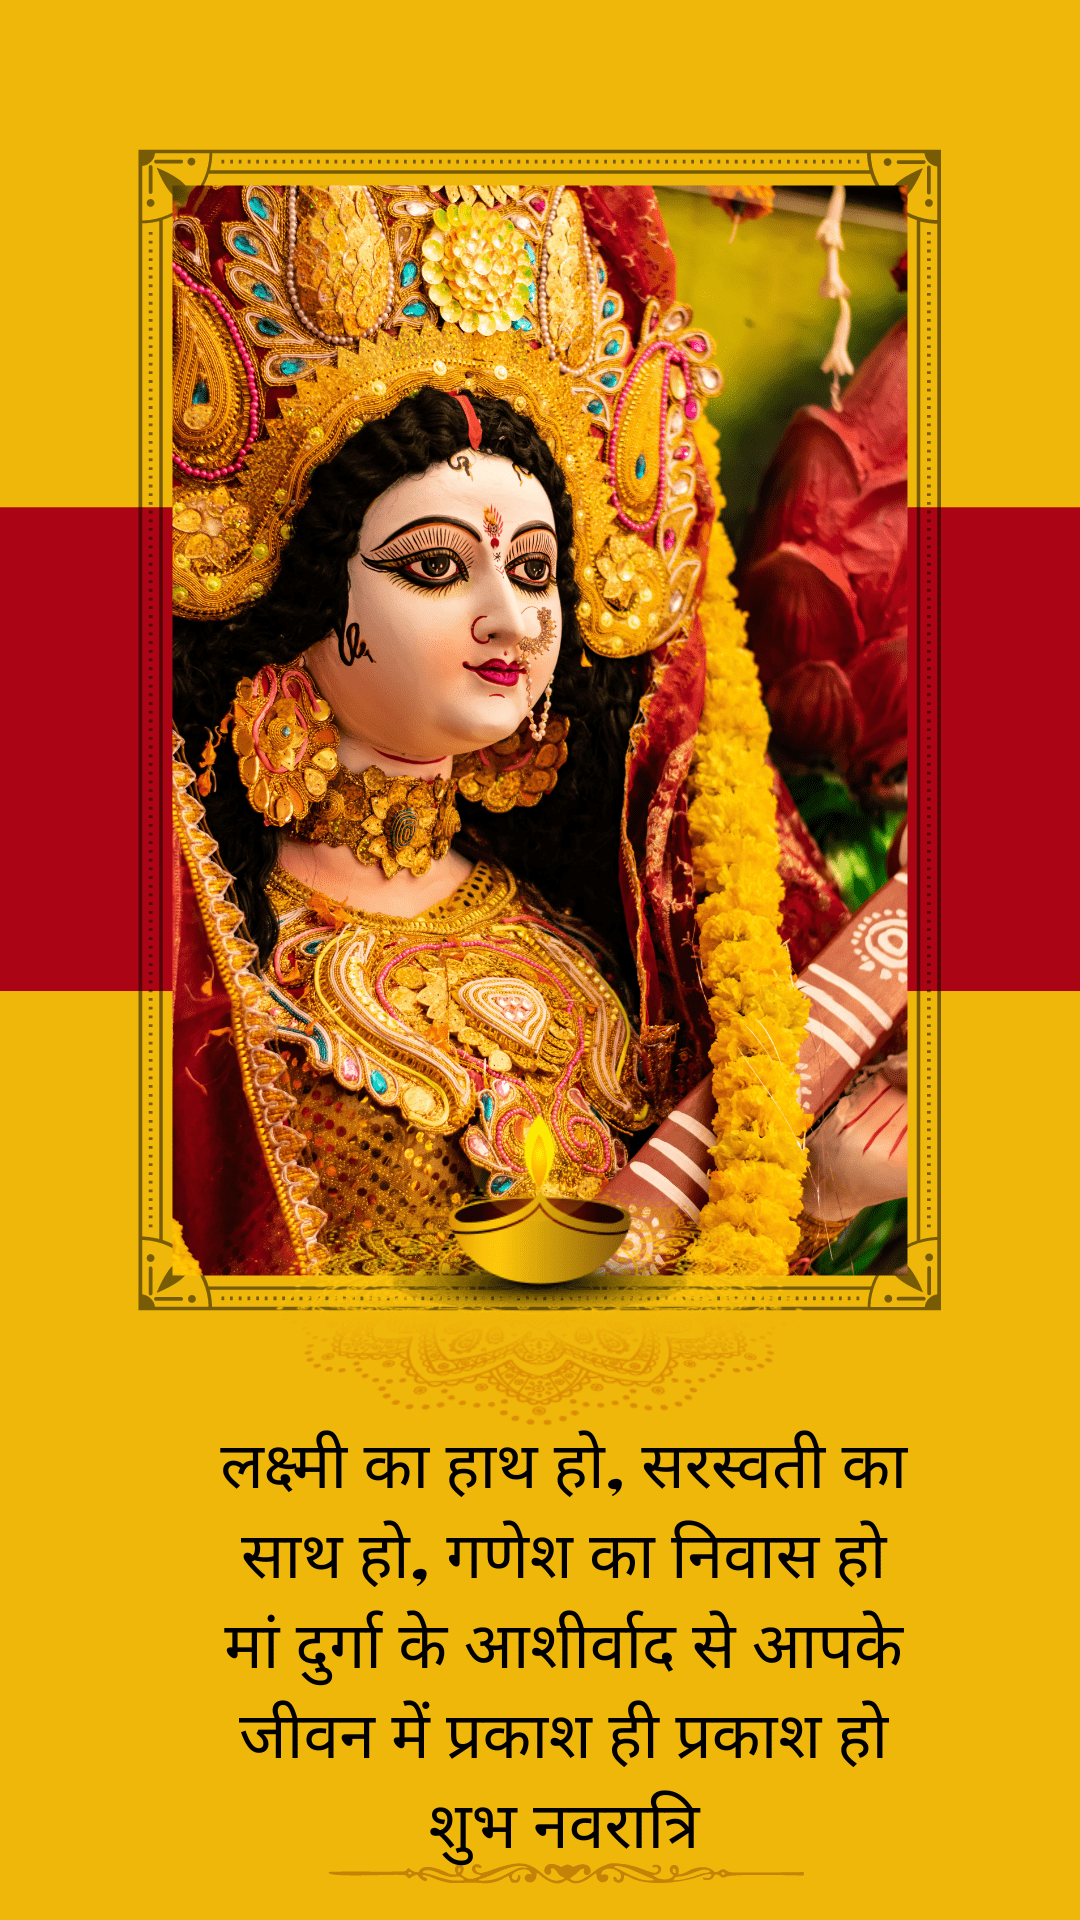 #{"id":2513,"_id":null,"name":"navratri-wishes-in-hindi","count":0,"data":null,"deleted_at":null,"created_at":"2023-09-06T12:37:56.000000Z","updated_at":"2023-09-06T12:37:56.000000Z","merge_with":null,"pivot":{"taggable_id":2336,"tag_id":2513,"taggable_type":"App\\Models\\Status"}}, #{"id":2518,"_id":null,"name":"navratri-whatsapp-status","count":0,"data":null,"deleted_at":null,"created_at":"2023-09-06T12:44:02.000000Z","updated_at":"2023-09-06T12:44:02.000000Z","merge_with":null,"pivot":{"taggable_id":2336,"tag_id":2518,"taggable_type":"App\\Models\\Status"}}, #{"id":72,"_id":"61f3f785e0f744570541c077","name":"navratri-wishes","count":42,"data":"{\"_id\":{\"$oid\":\"61f3f785e0f744570541c077\"},\"id\":\"46\",\"name\":\"navratri-wishes\",\"created_at\":\"2020-10-15-18:56:19\",\"updated_at\":\"2020-10-15-18:56:19\",\"updatedAt\":{\"$date\":\"2022-01-28T14:33:44.922Z\"},\"count\":42}","deleted_at":null,"created_at":"2020-10-15T06:56:19.000000Z","updated_at":"2020-10-15T06:56:19.000000Z","merge_with":null,"pivot":{"taggable_id":2336,"tag_id":72,"taggable_type":"App\\Models\\Status"}}, #{"id":2511,"_id":null,"name":"happy-navratri-2023","count":0,"data":null,"deleted_at":null,"created_at":"2023-09-06T12:27:27.000000Z","updated_at":"2023-09-06T12:27:27.000000Z","merge_with":null,"pivot":{"taggable_id":2336,"tag_id":2511,"taggable_type":"App\\Models\\Status"}}, #{"id":1322,"_id":"61f3f785e0f744570541c29b","name":"happy-chaitra-navratri","count":38,"data":"{\"_id\":{\"$oid\":\"61f3f785e0f744570541c29b\"},\"id\":\"594\",\"name\":\"happy-chaitra-navratri\",\"created_at\":\"2021-03-30-12:46:39\",\"updated_at\":\"2021-03-30-12:46:39\",\"updatedAt\":{\"$date\":\"2022-01-28T14:33:44.922Z\"},\"count\":38}","deleted_at":null,"created_at":"2021-03-30T12:46:39.000000Z","updated_at":"2021-03-30T12:46:39.000000Z","merge_with":null,"pivot":{"taggable_id":2336,"tag_id":1322,"taggable_type":"App\\Models\\Status"}}, #{"id":2516,"_id":null,"name":"navratri-status-in-hindi","count":0,"data":null,"deleted_at":null,"created_at":"2023-09-06T12:40:02.000000Z","updated_at":"2023-09-06T12:40:02.000000Z","merge_with":null,"pivot":{"taggable_id":2336,"tag_id":2516,"taggable_type":"App\\Models\\Status"}}